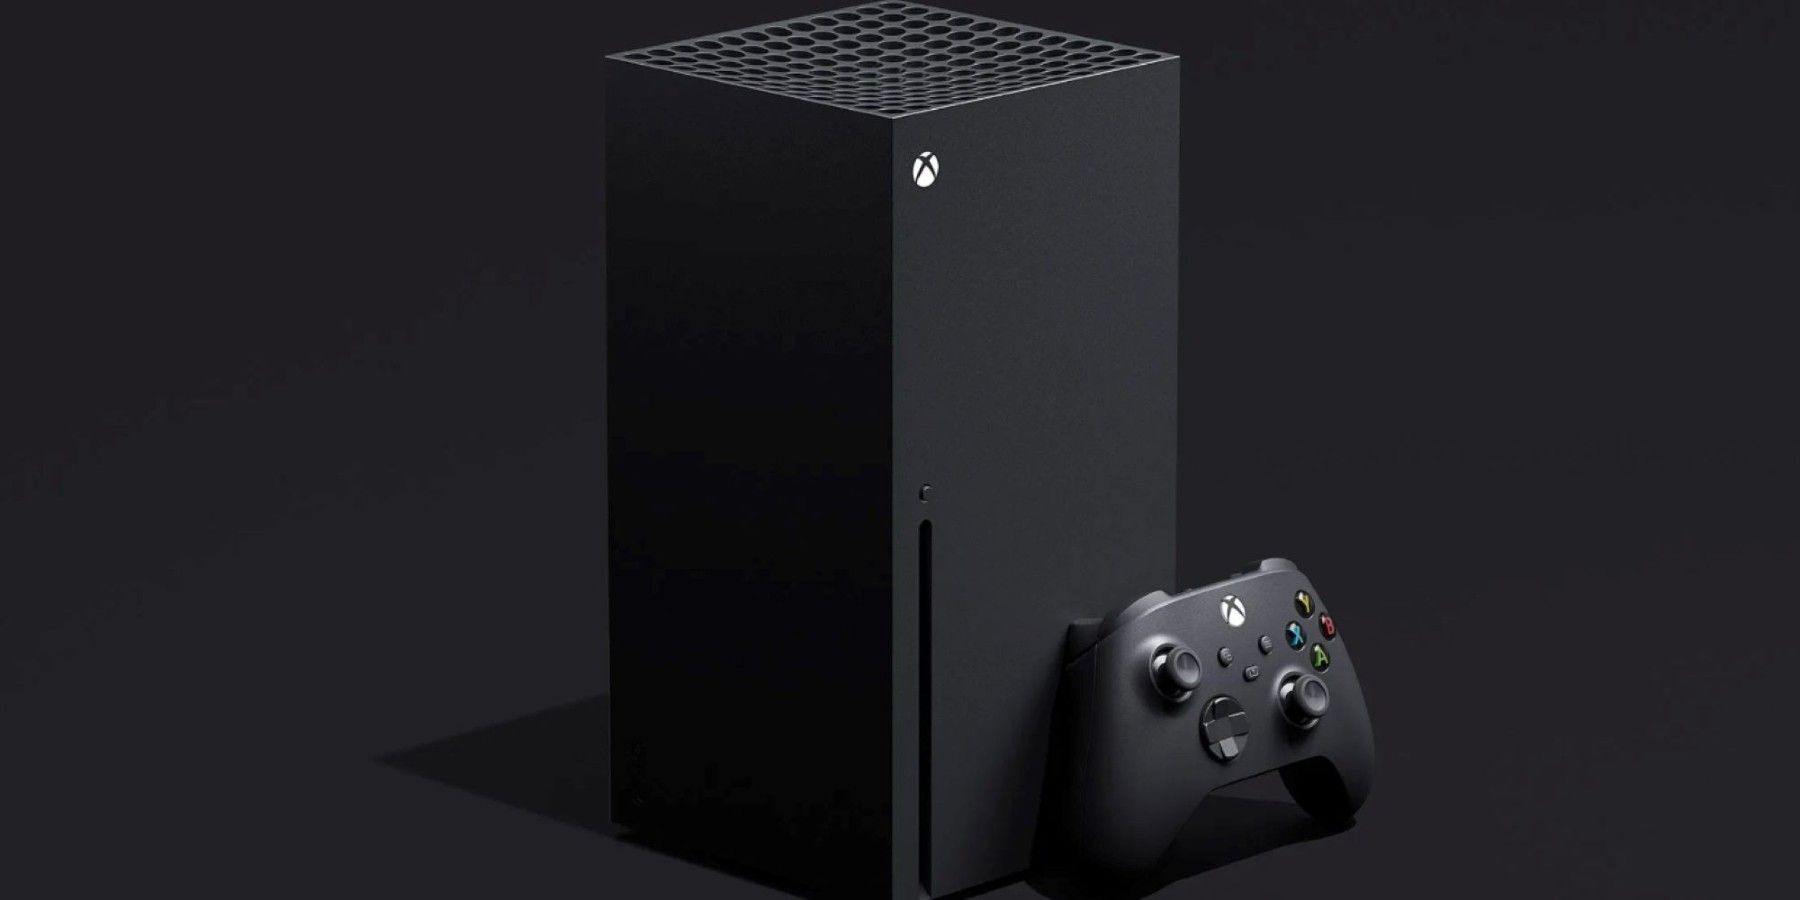 A spider gets inside an Xbox Series X console and creates a web